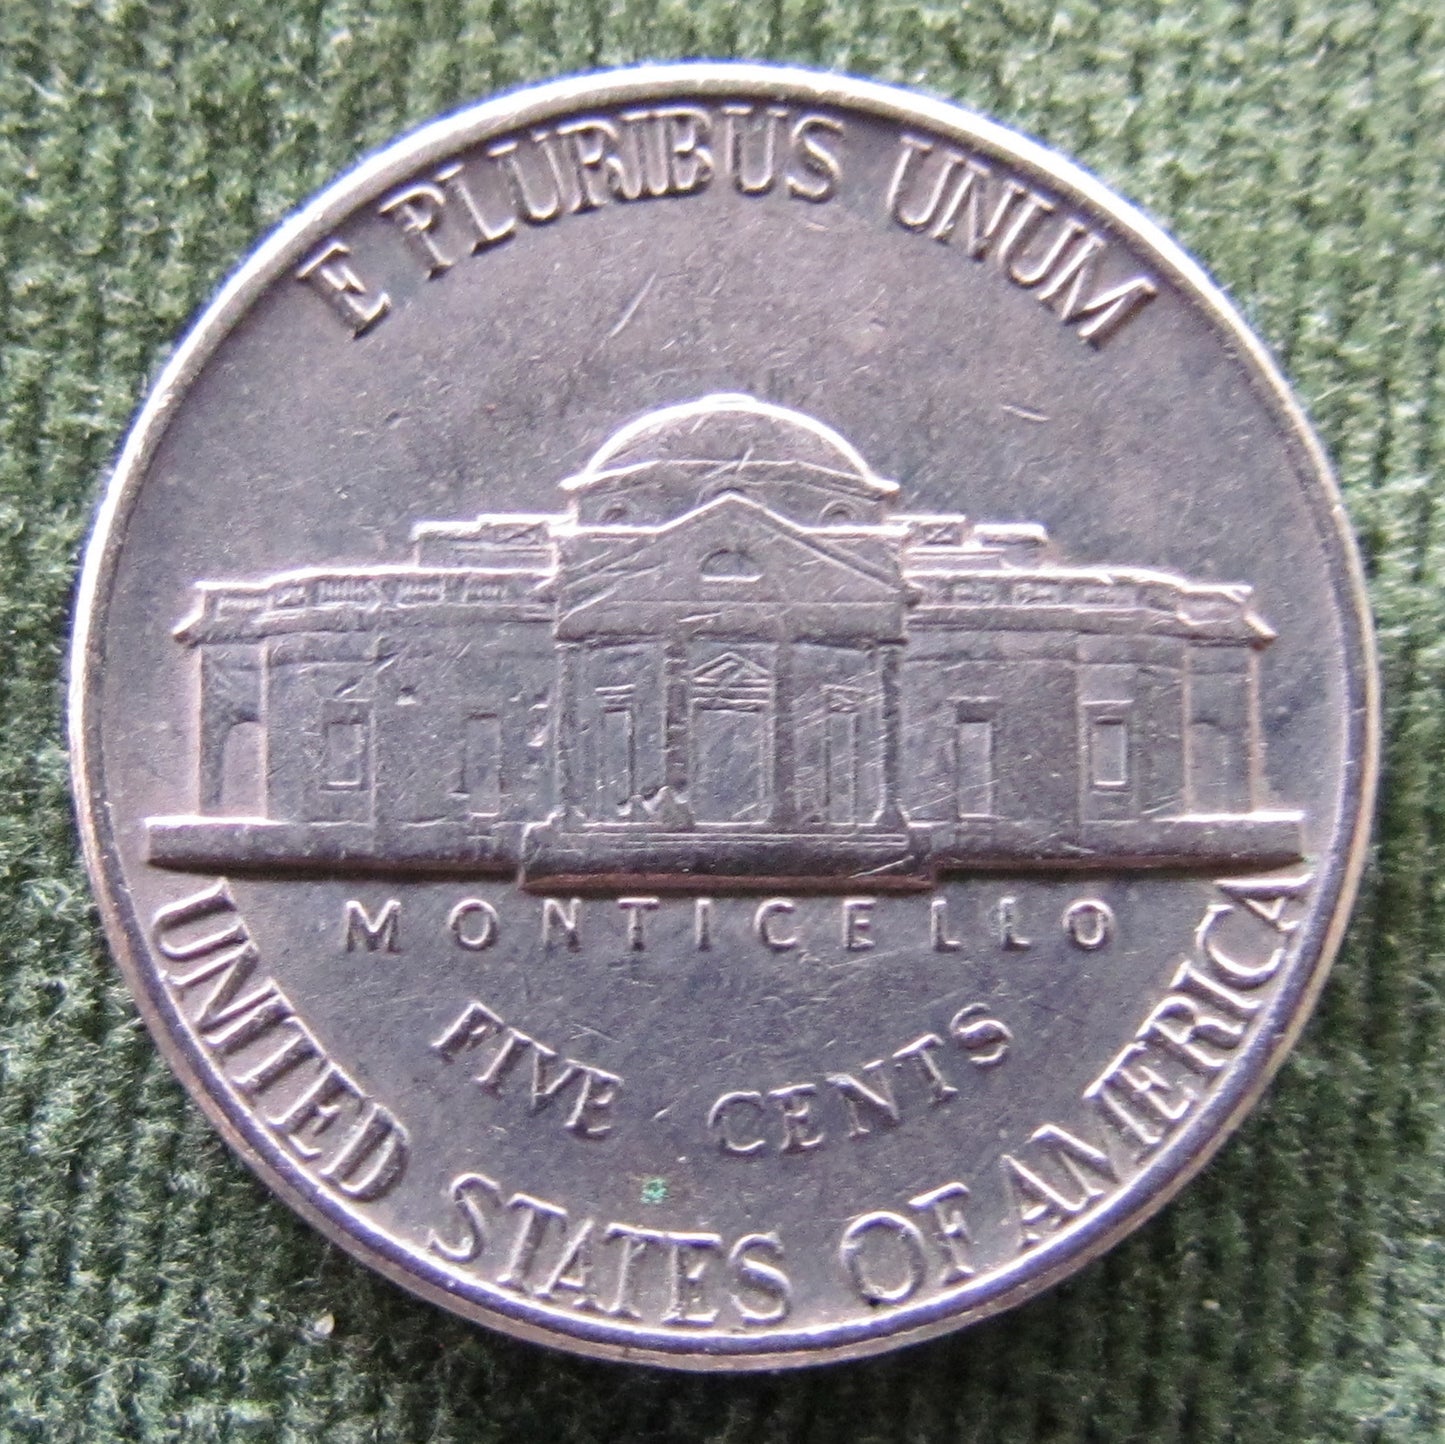 USA American 1977 D Nickel Jefferson Coin - Circulated